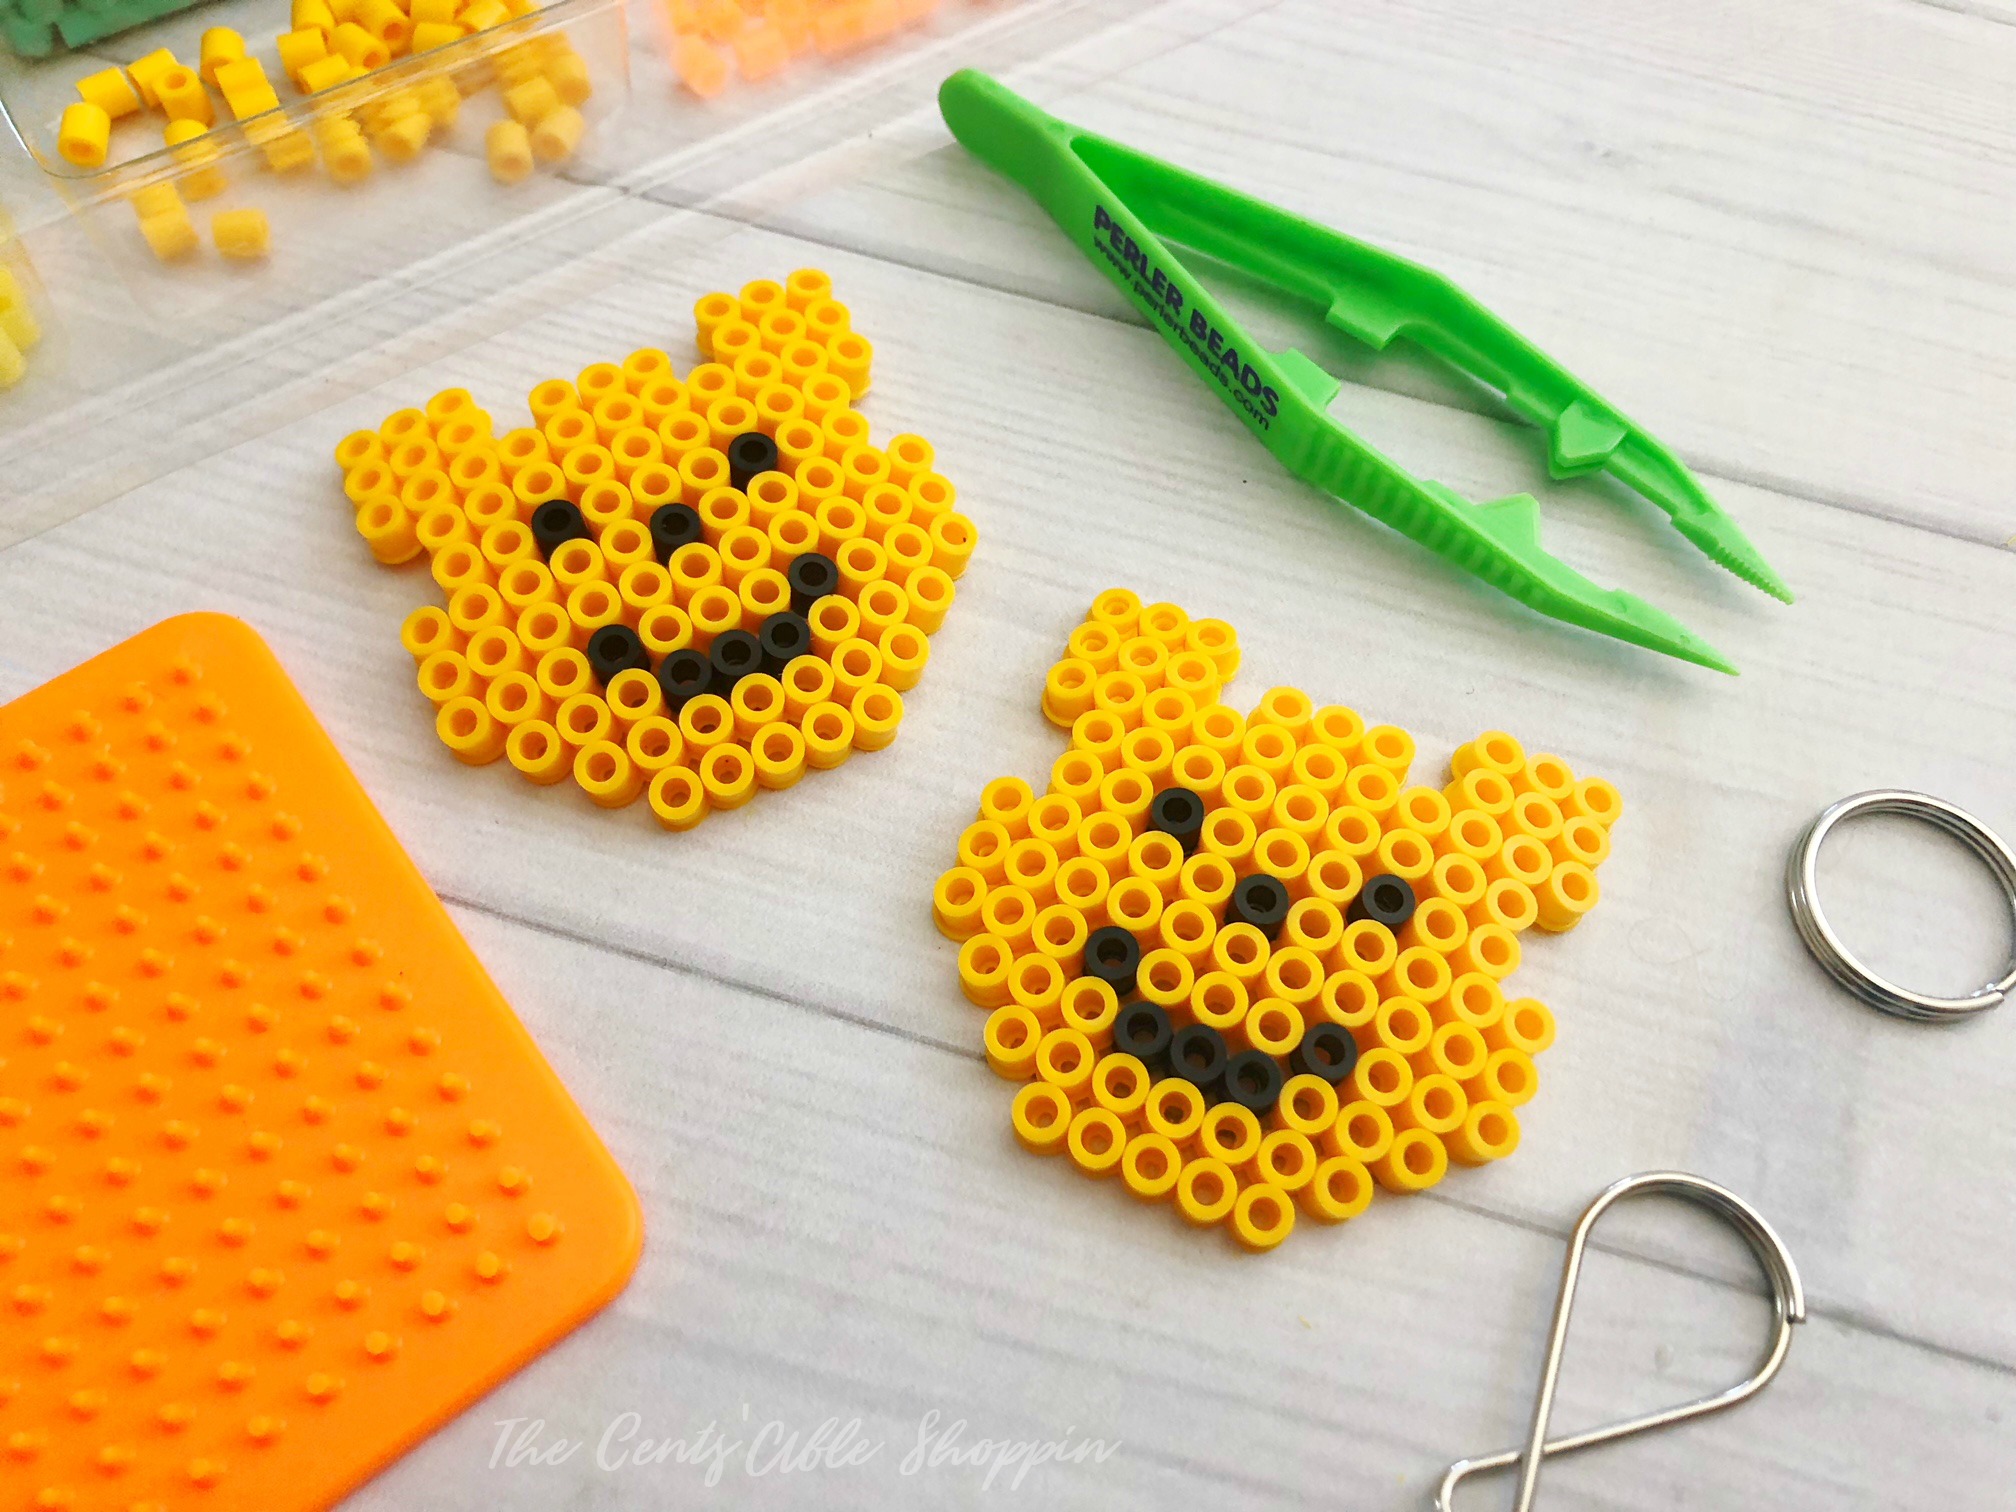 This Pooh Perler Bead Keychain is simple to make and surprisingly cute to make year round! They are a fun way to keep kids busy on hot or rainy days!